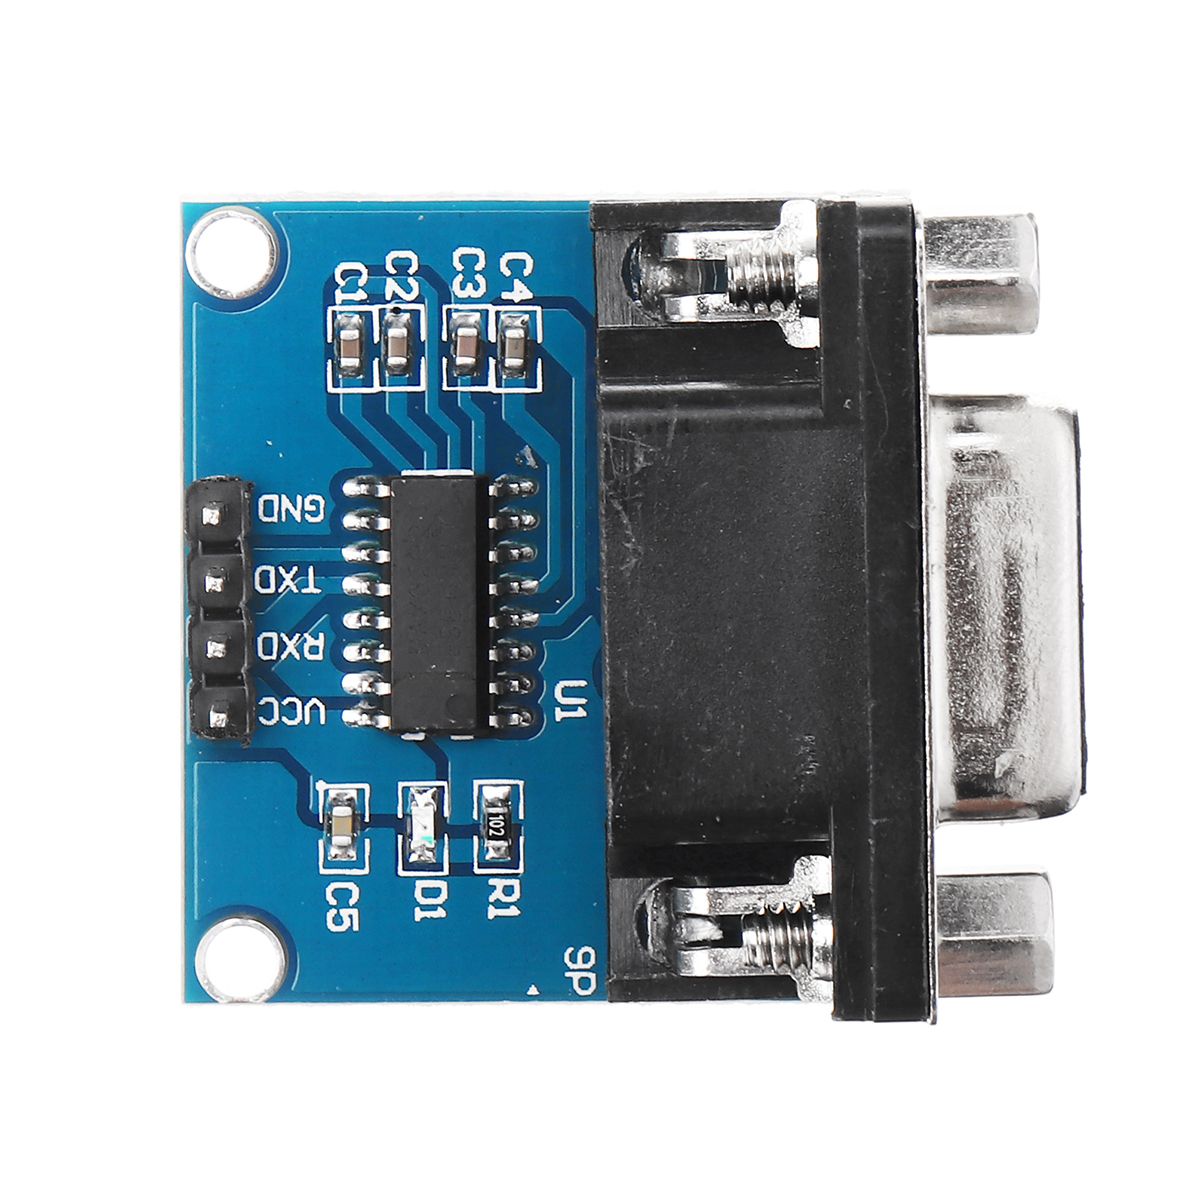 20pcs-RS232-to-TTL-Serial-Port-Converter-Module-DB9-Connector-MAX3232-Serial-Module-1527325